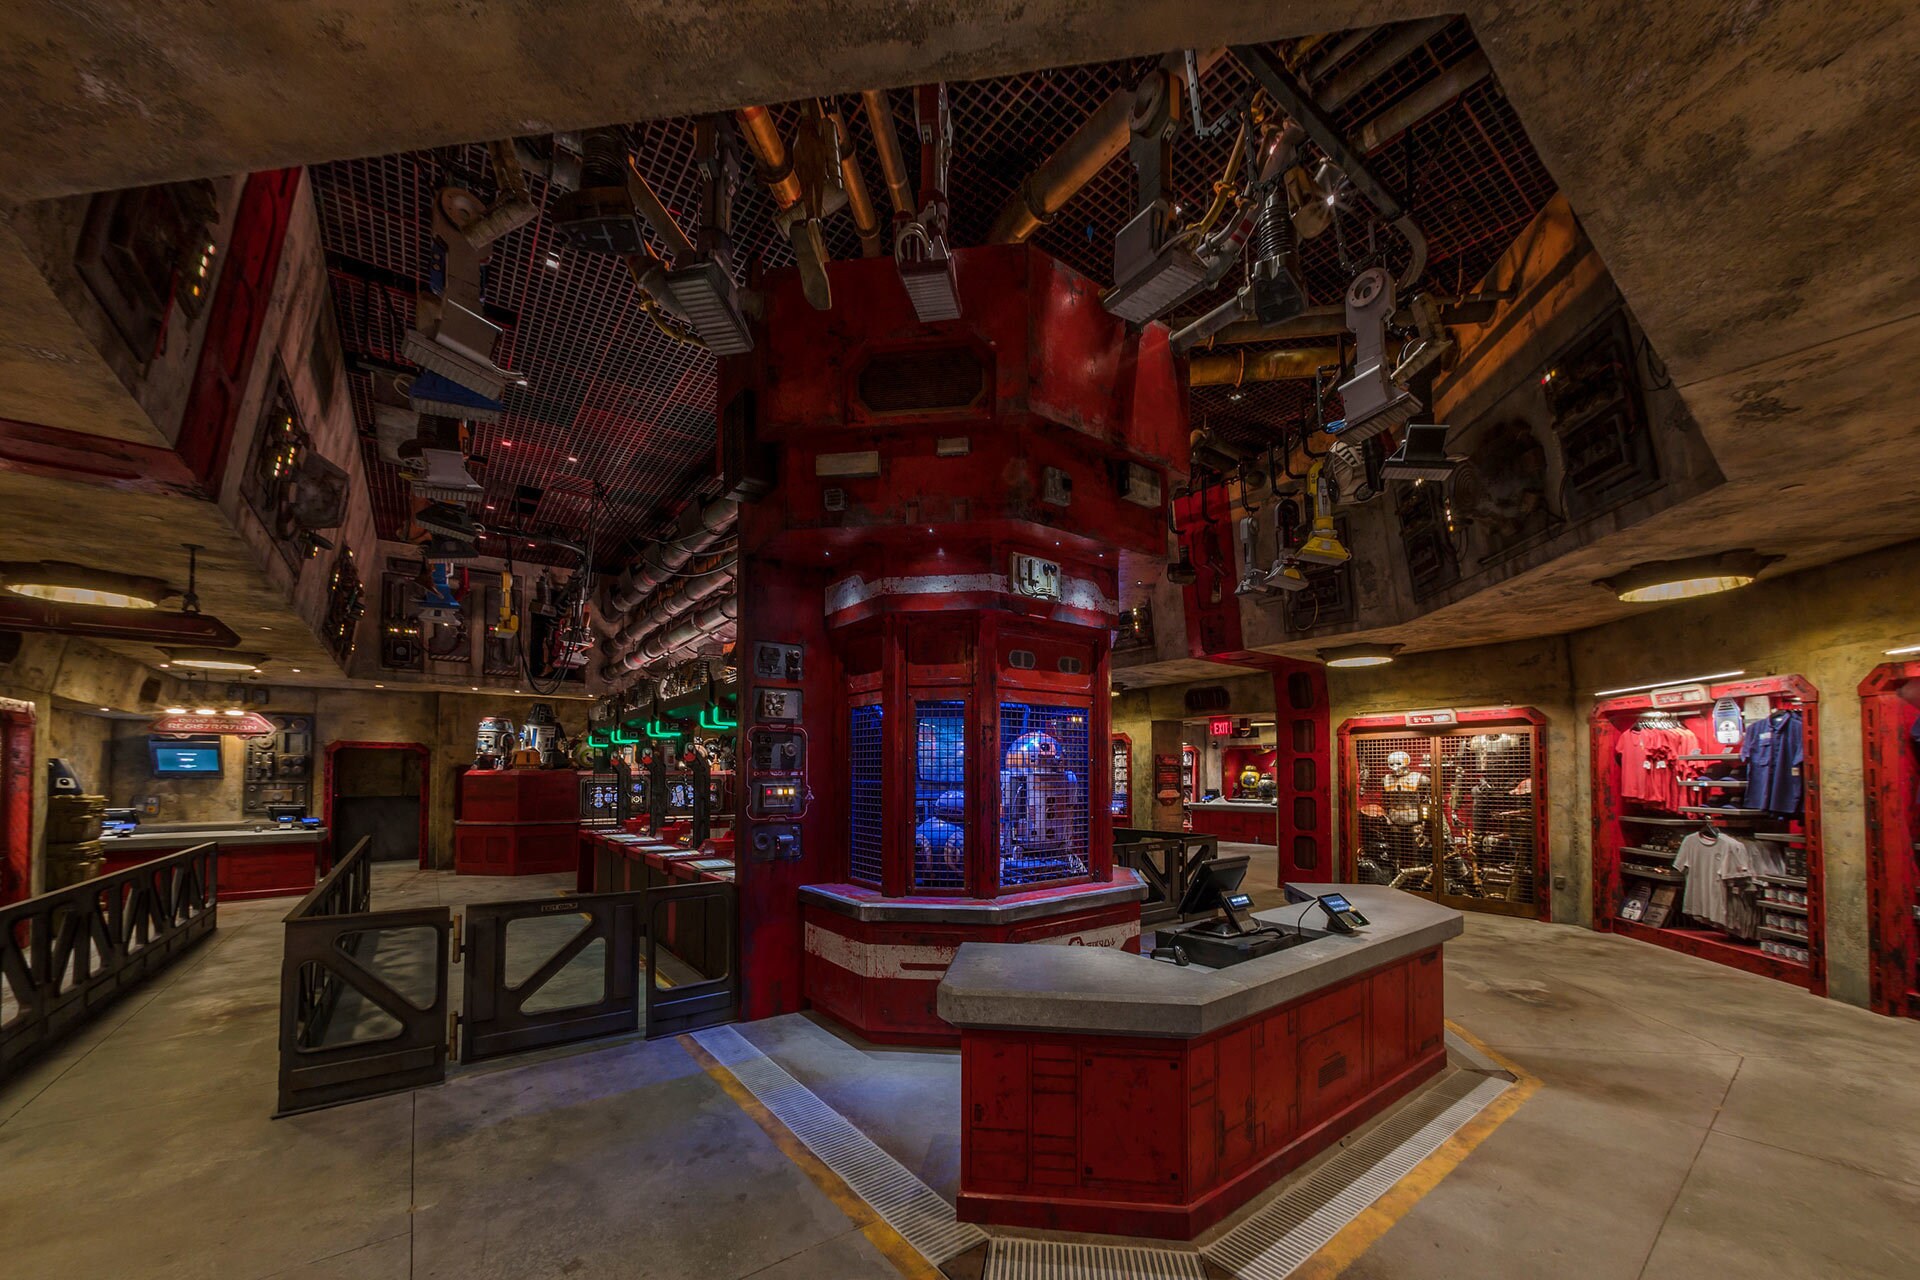 In the Droid Depot at Star Wars: Galaxy’s Edge, guests will be able to build their own personal droids.